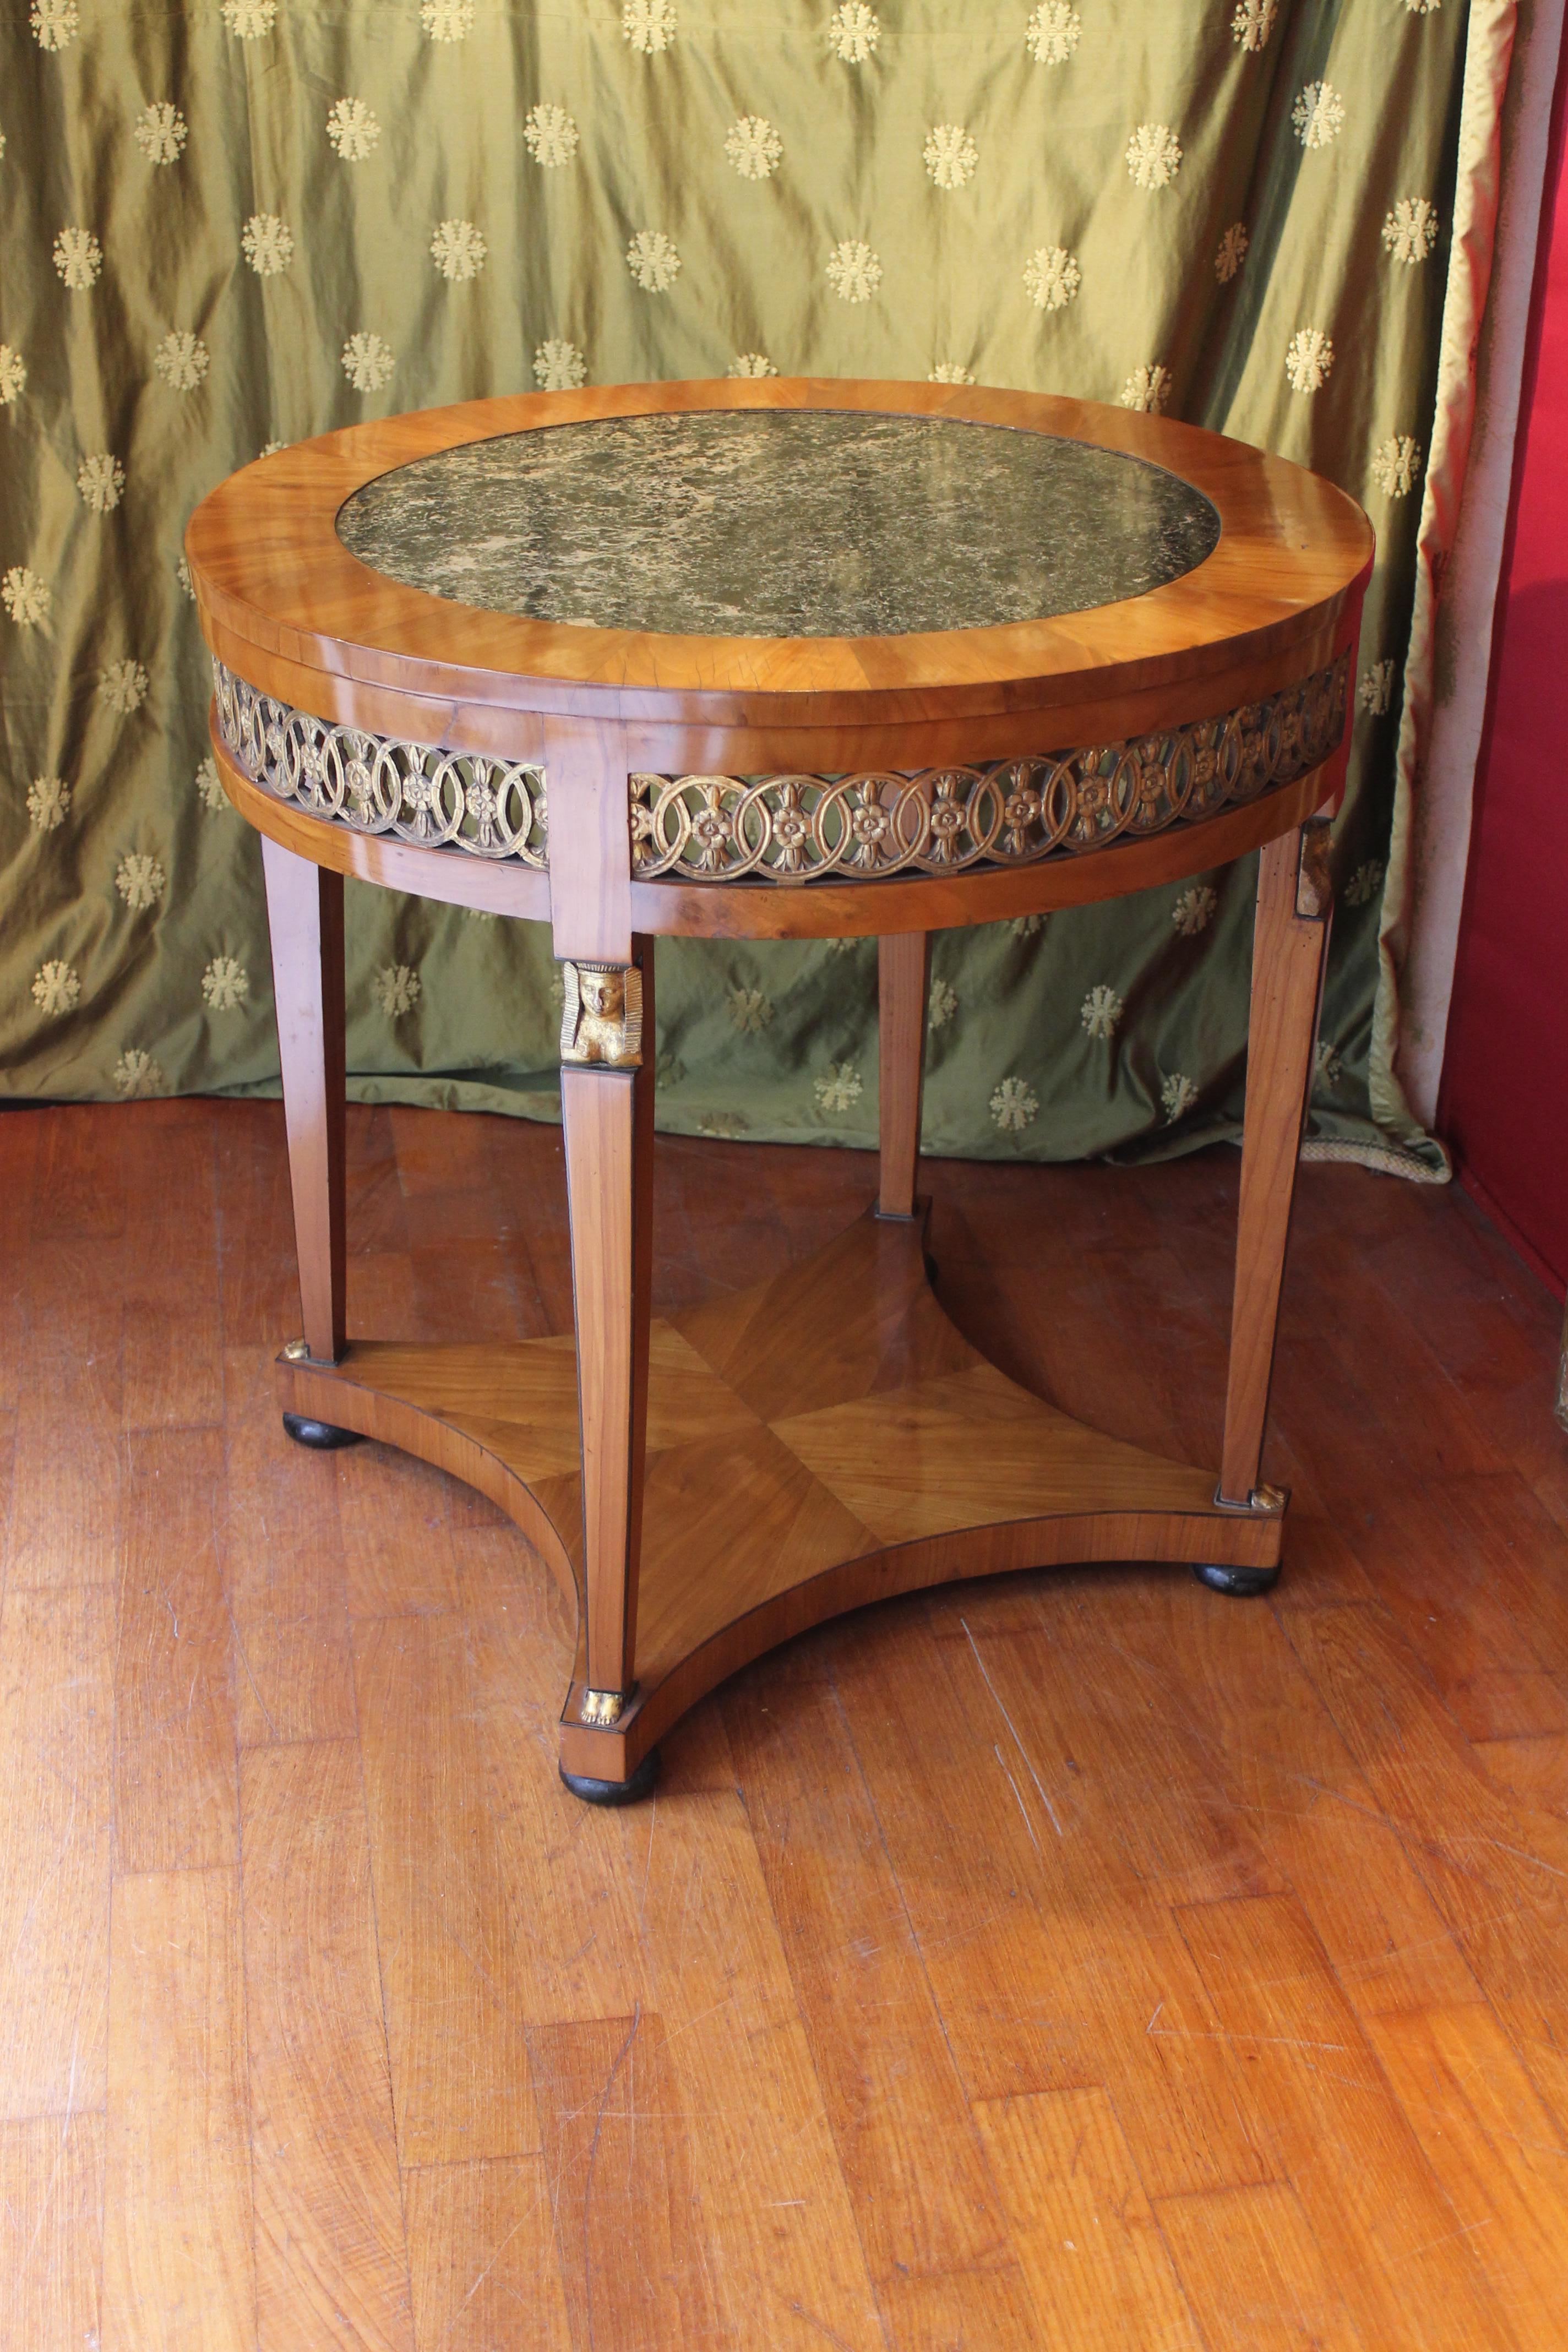 This outstanding cherrywood and giltwood round centre table belongs to the Empire period called 